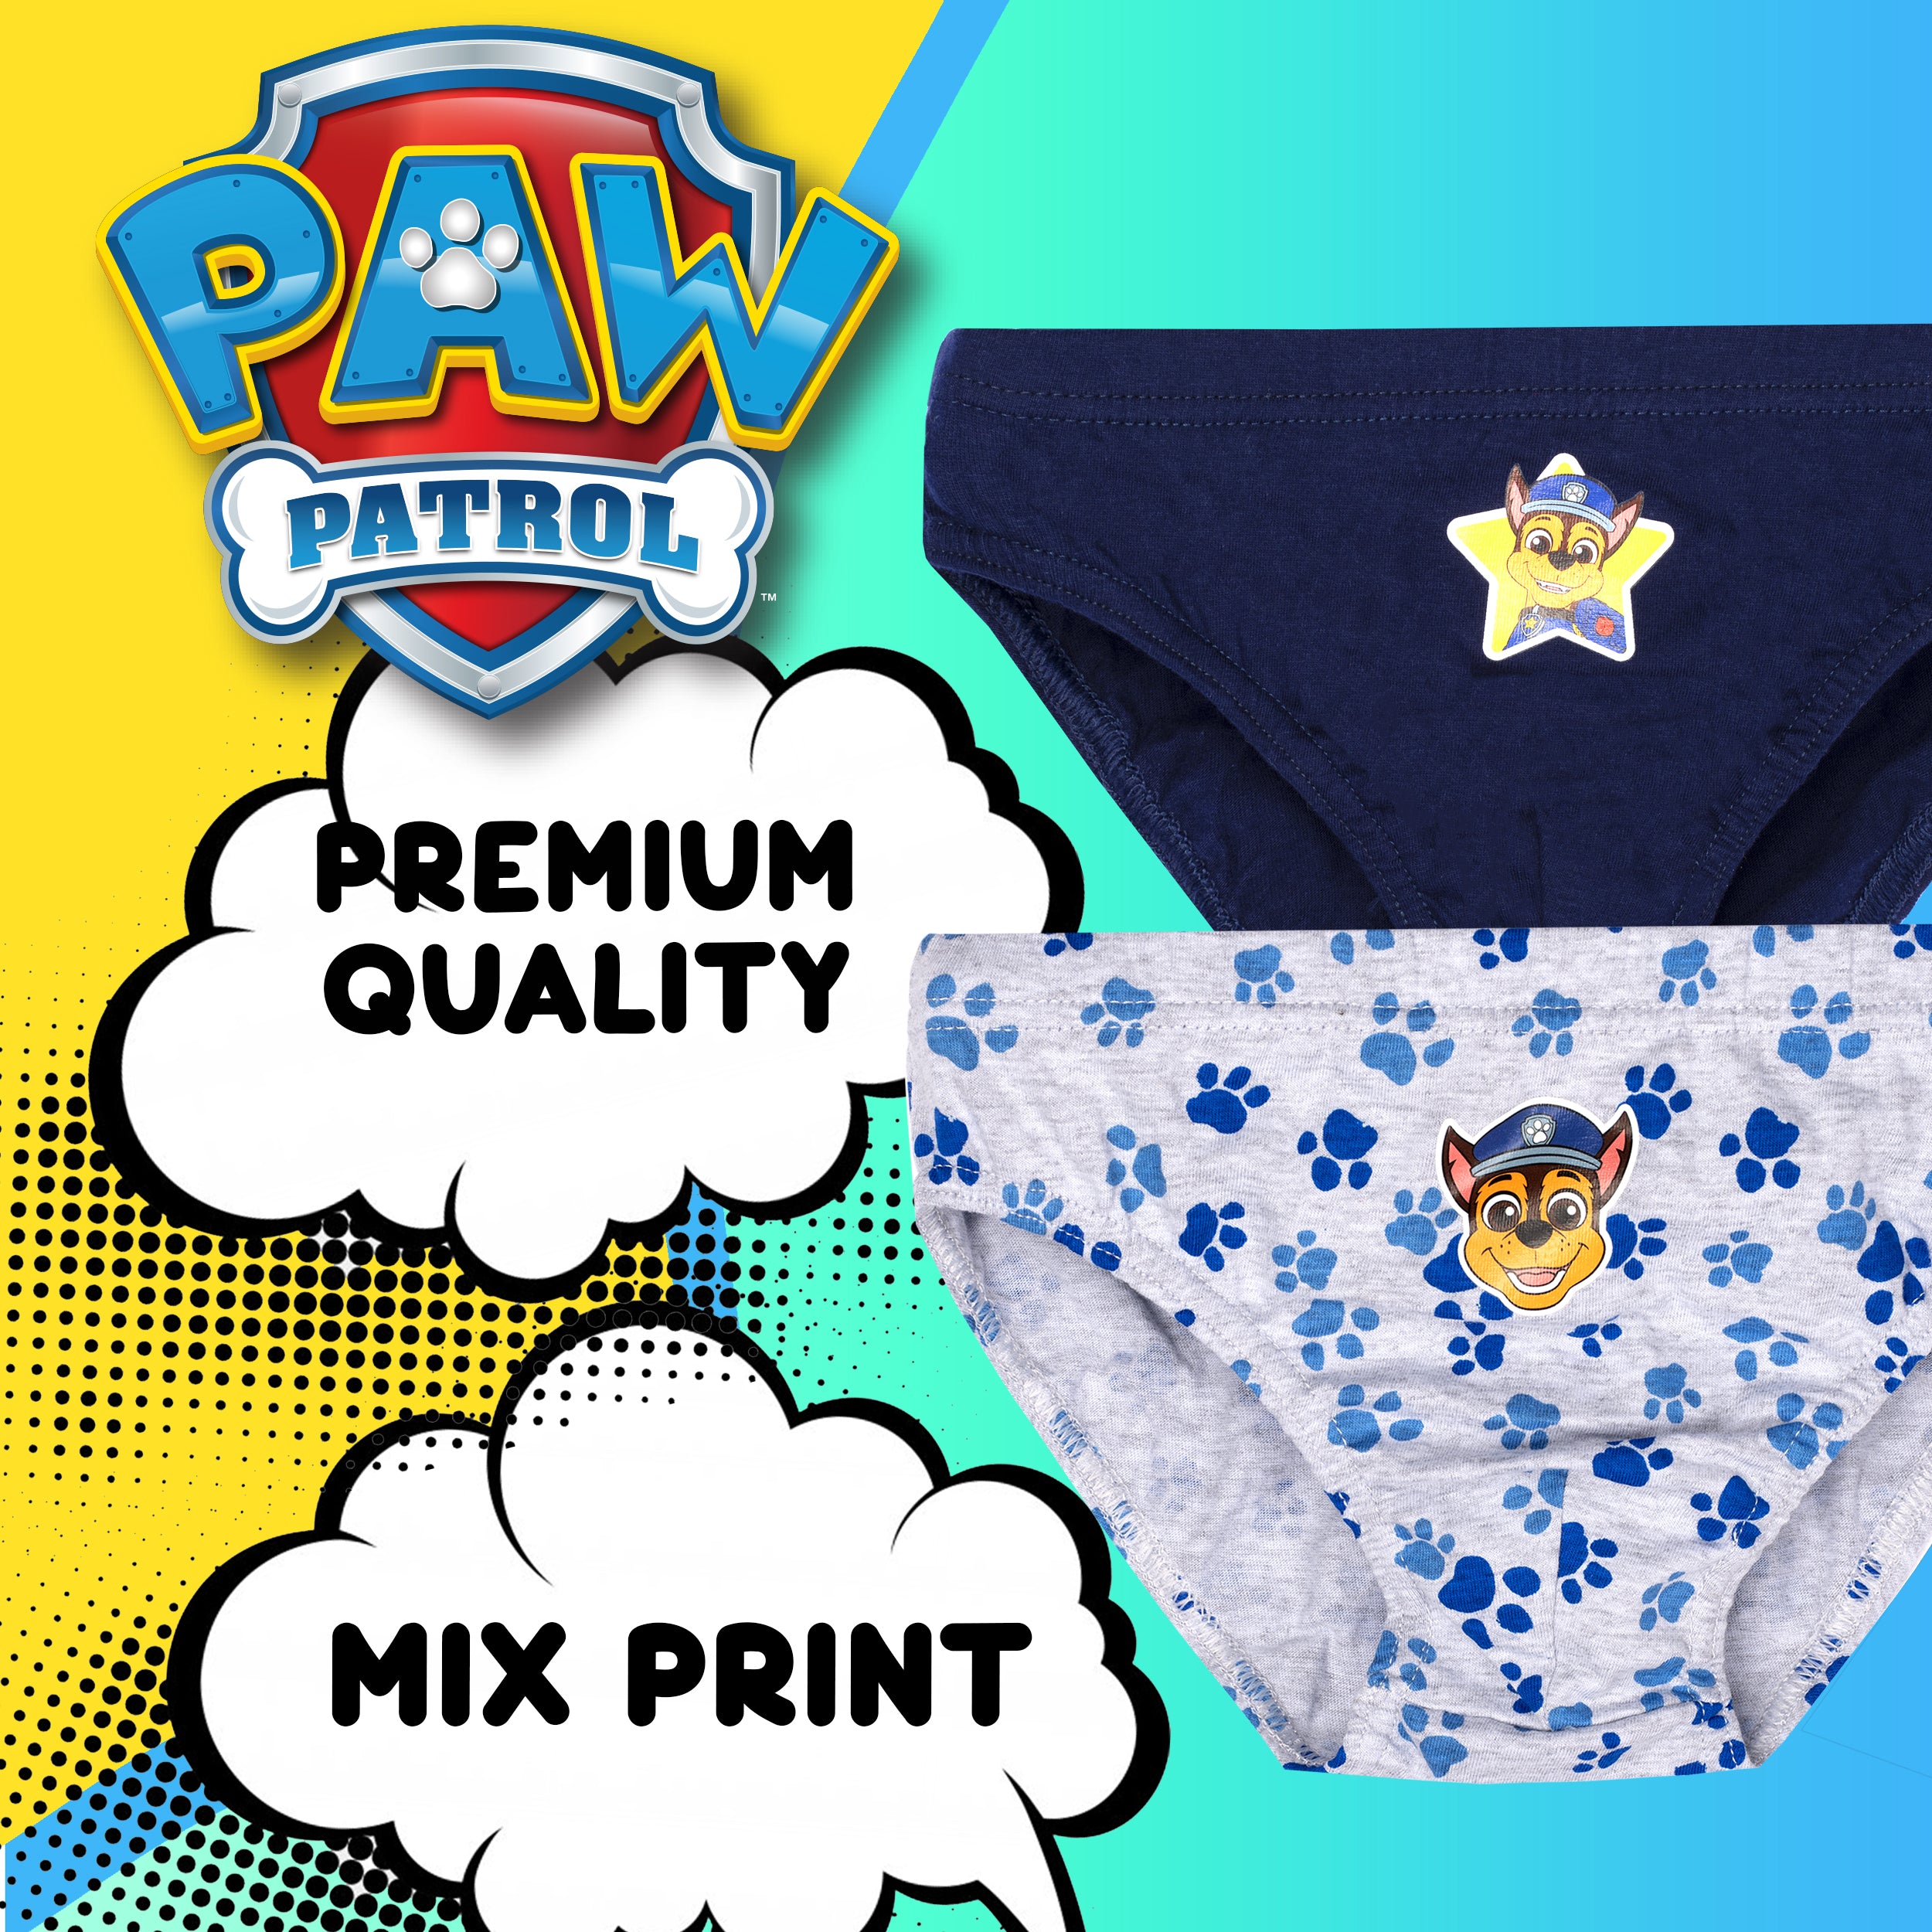 PAW Patrol Character Briefs 5 Pack, Kids